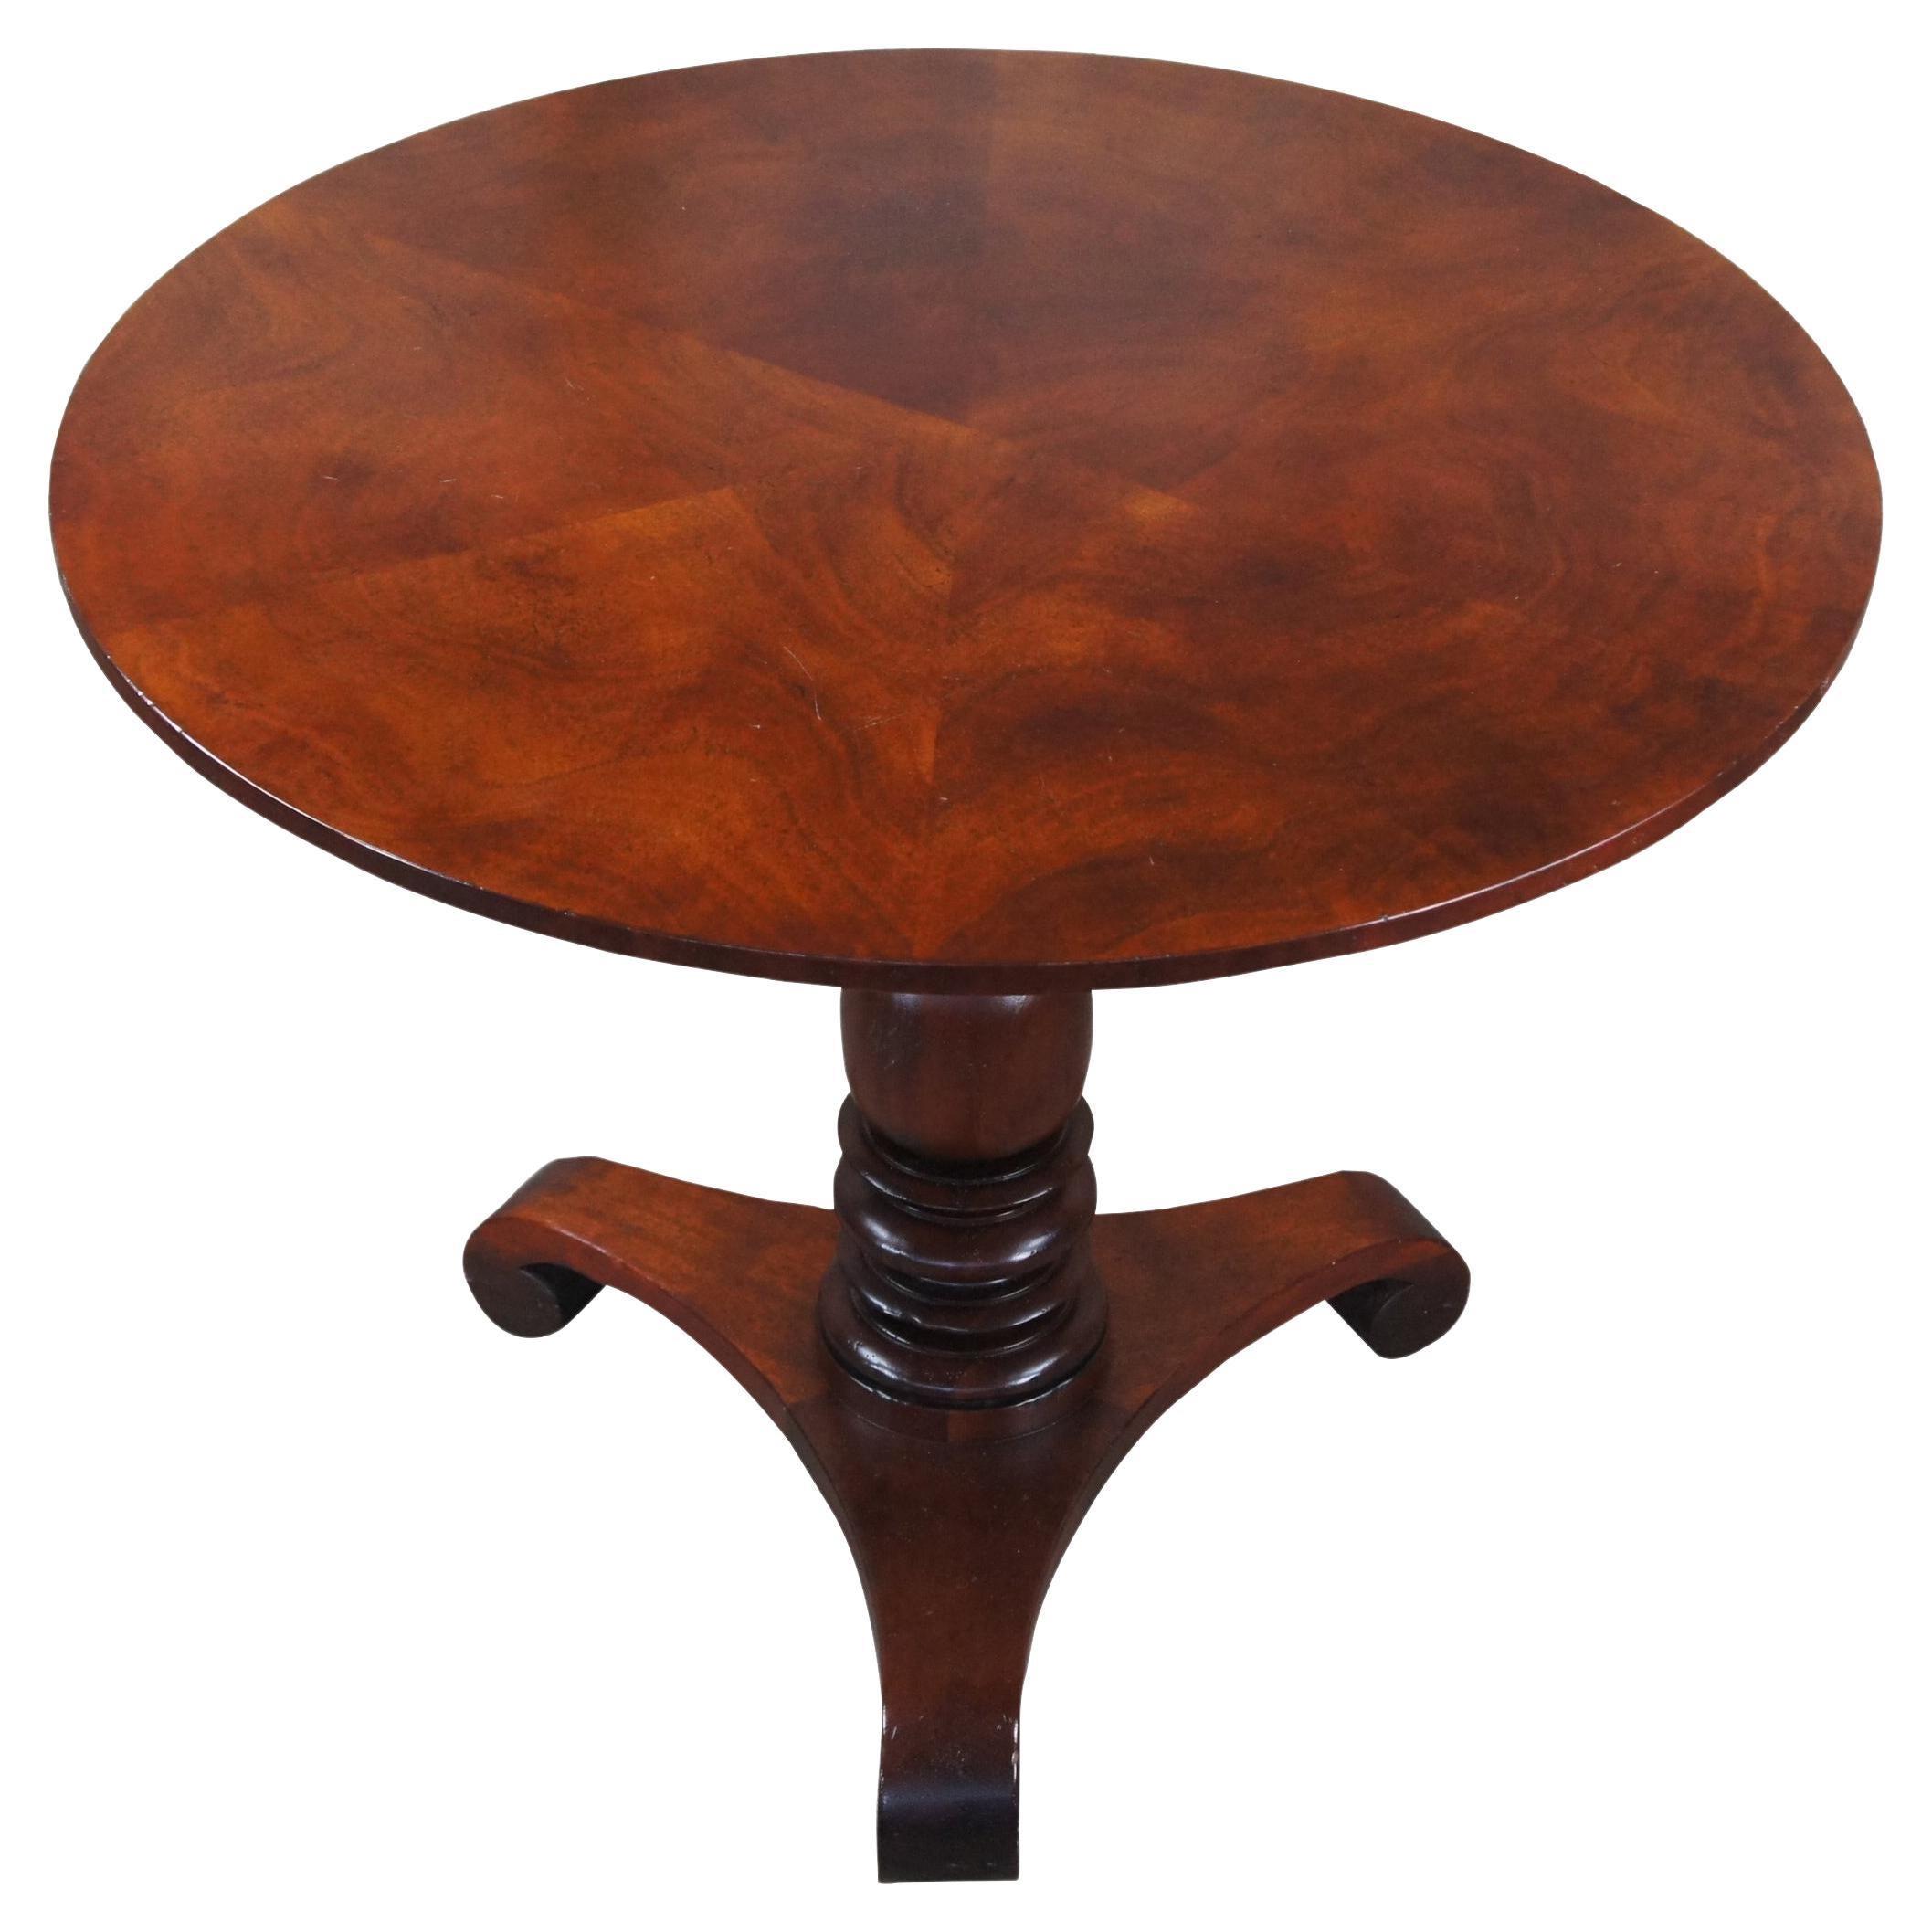 Baker Furniture Milling Road Empire Mahogany Round Pedestal Center Accent Table 